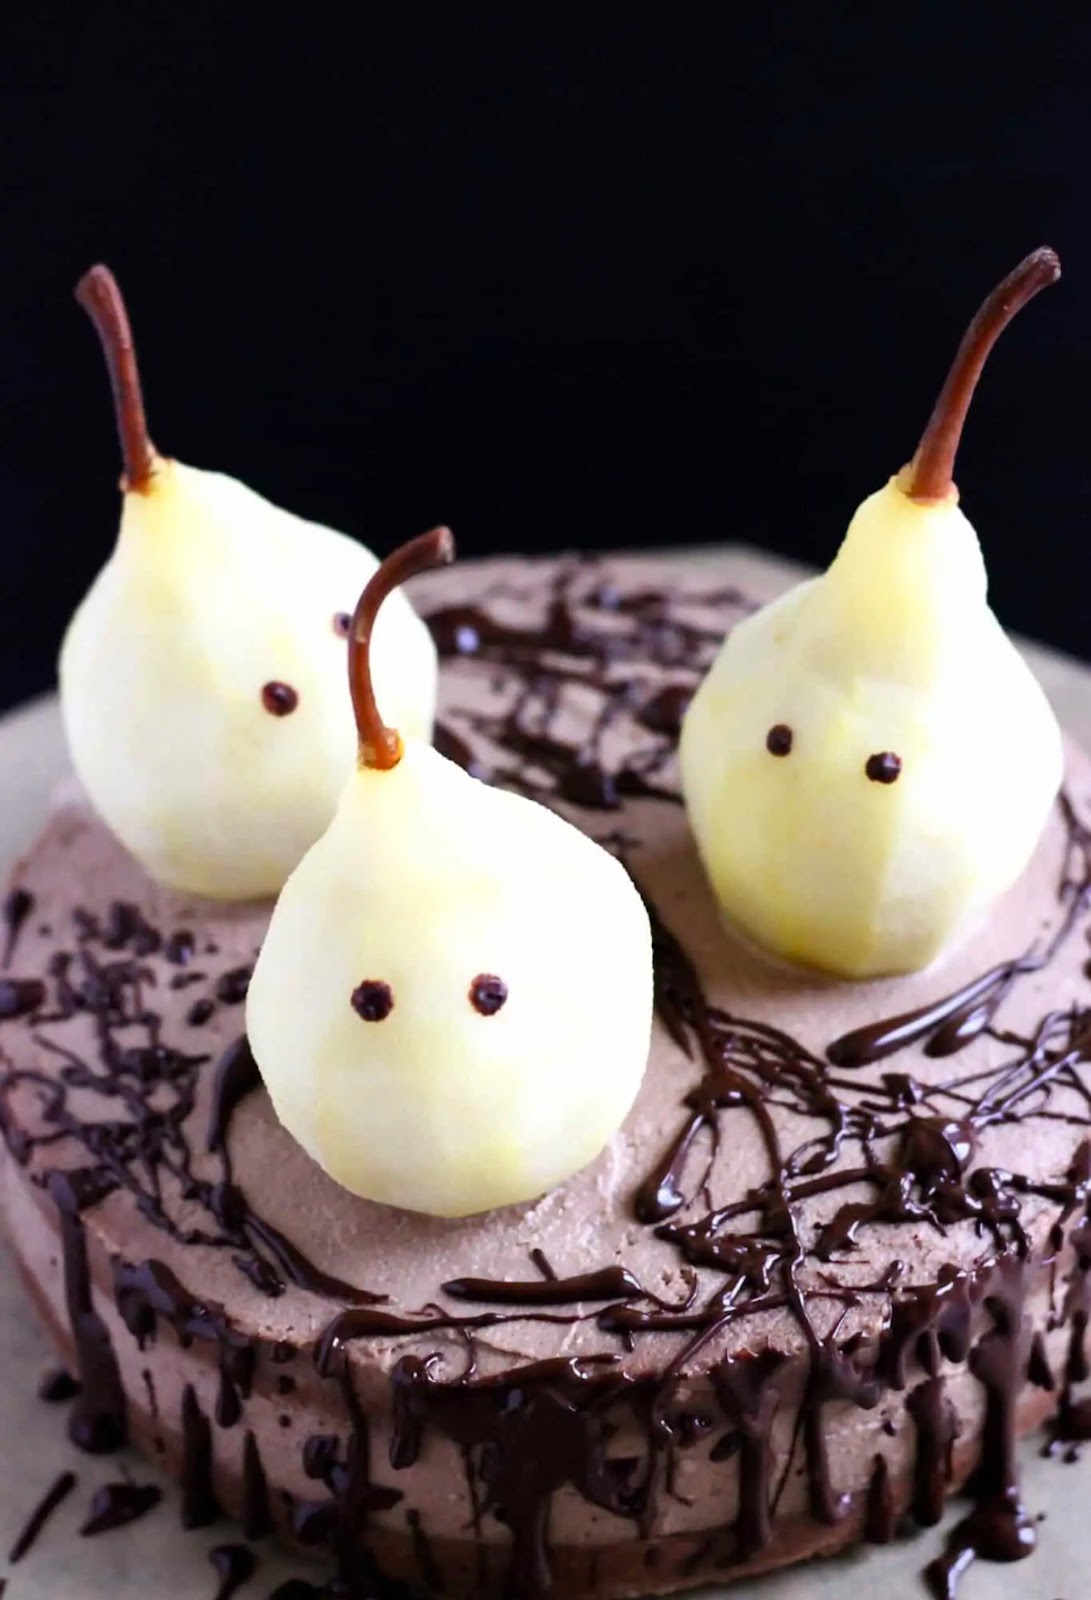 Halloween themed cake decorated with pears designed to look like ghosts. 